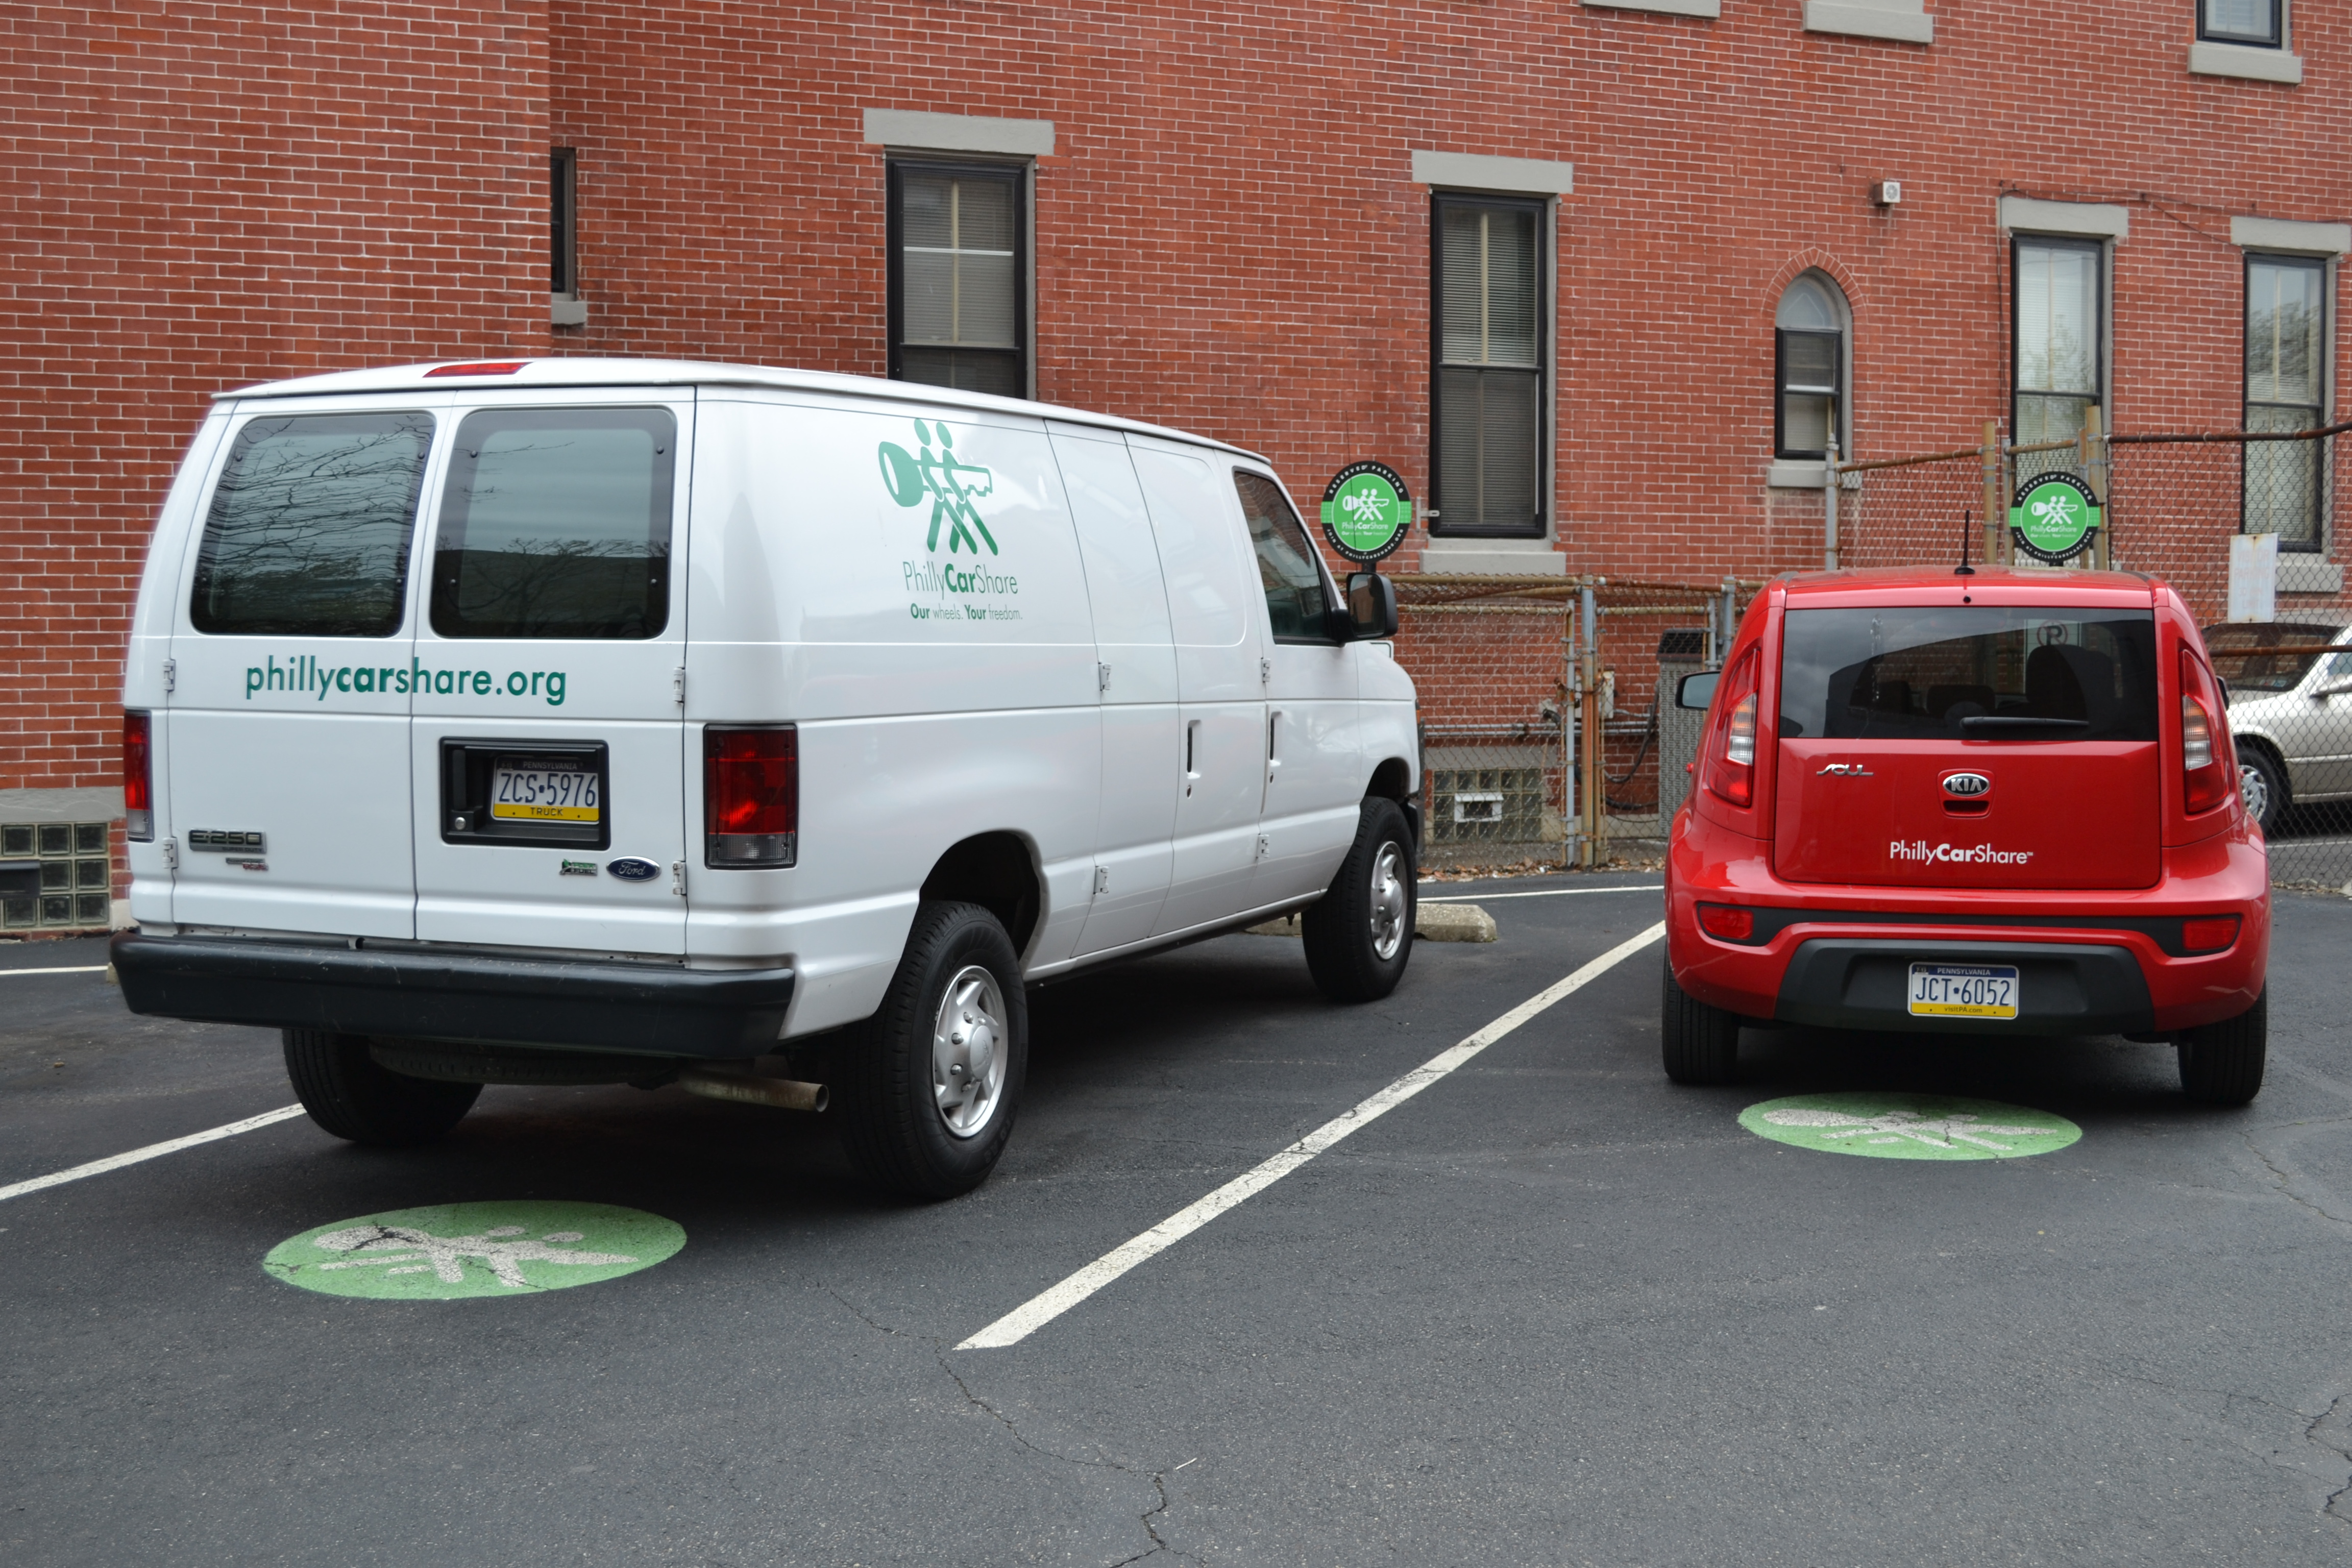 Parent company Enterprise Holdings announced PhillyCarShare will now go by Enterprise Car Share